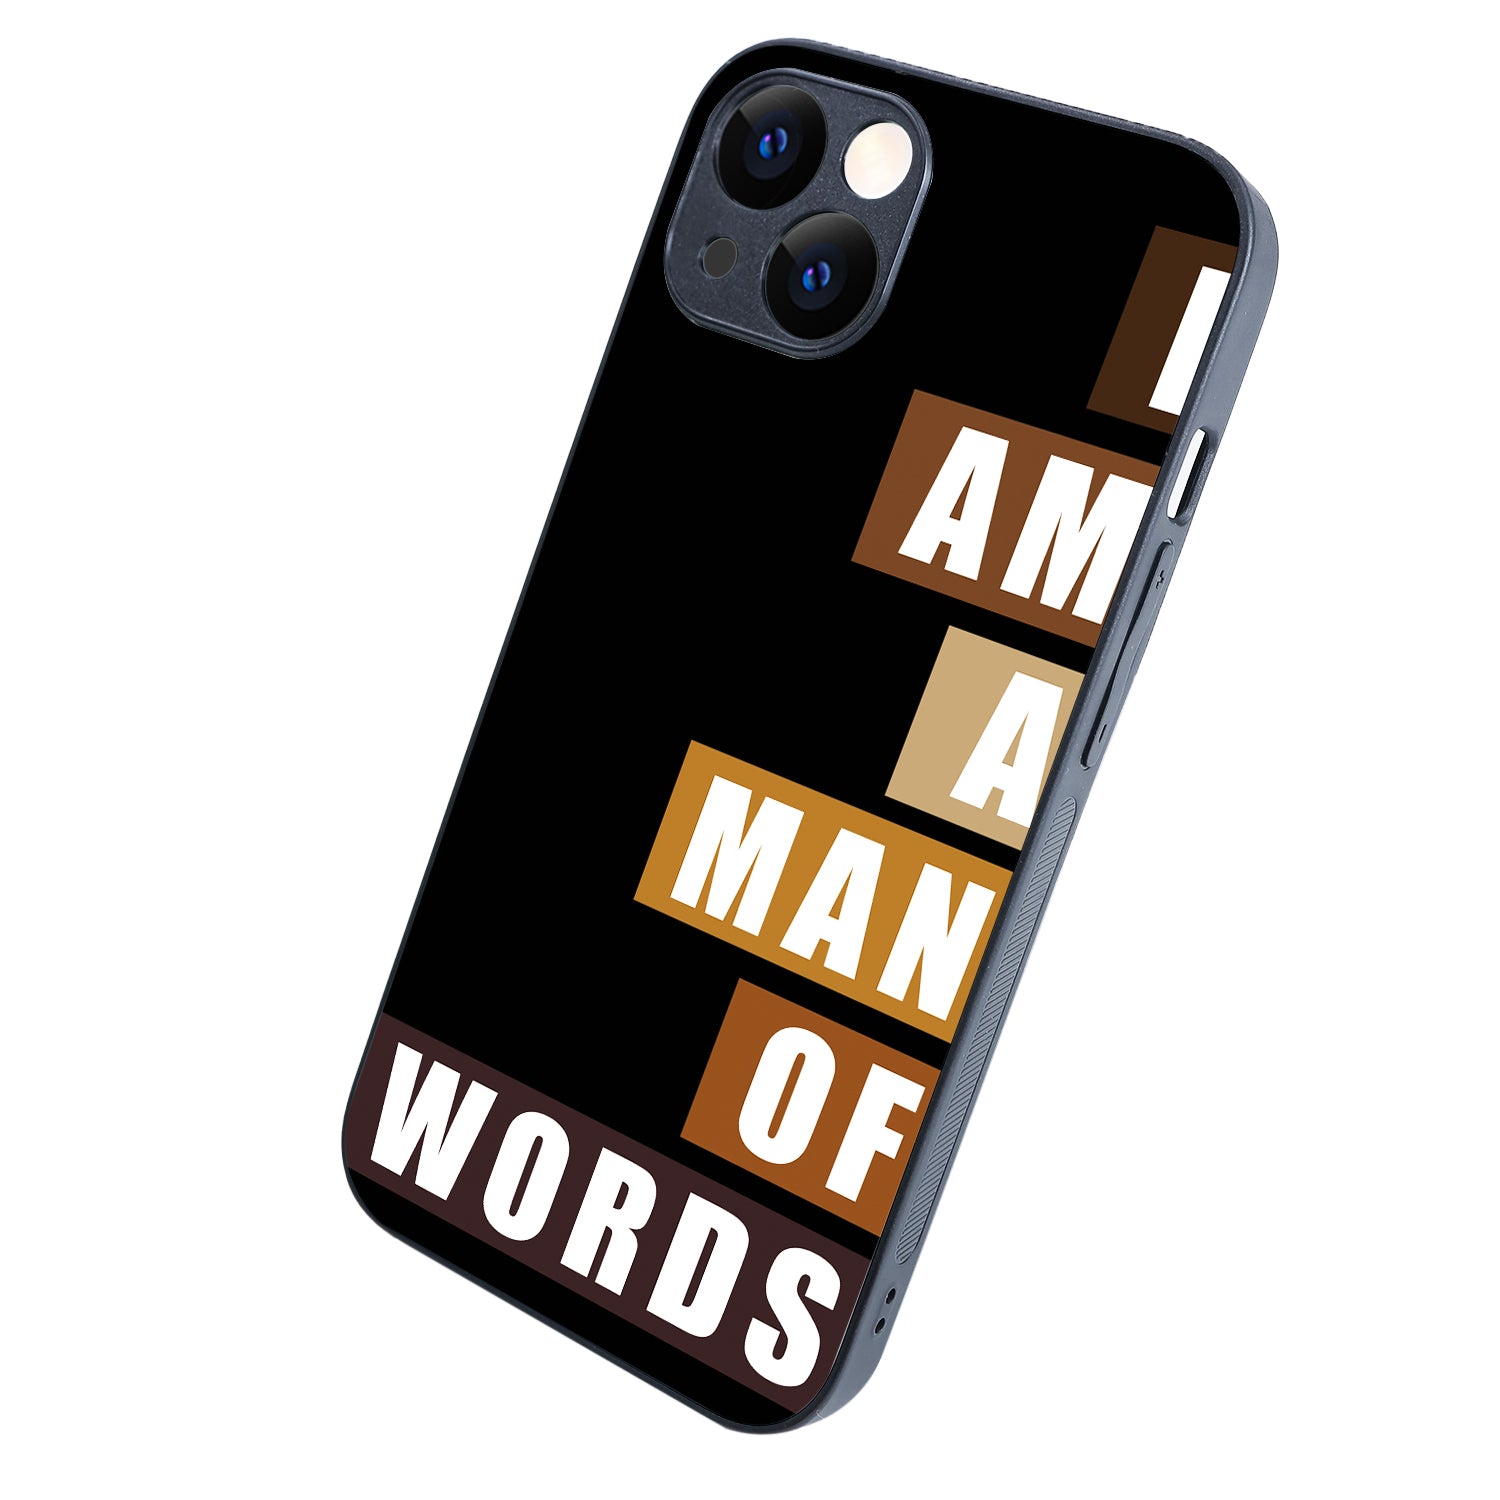 I Am A Man Of Words Motivational Quotes iPhone 13 Case